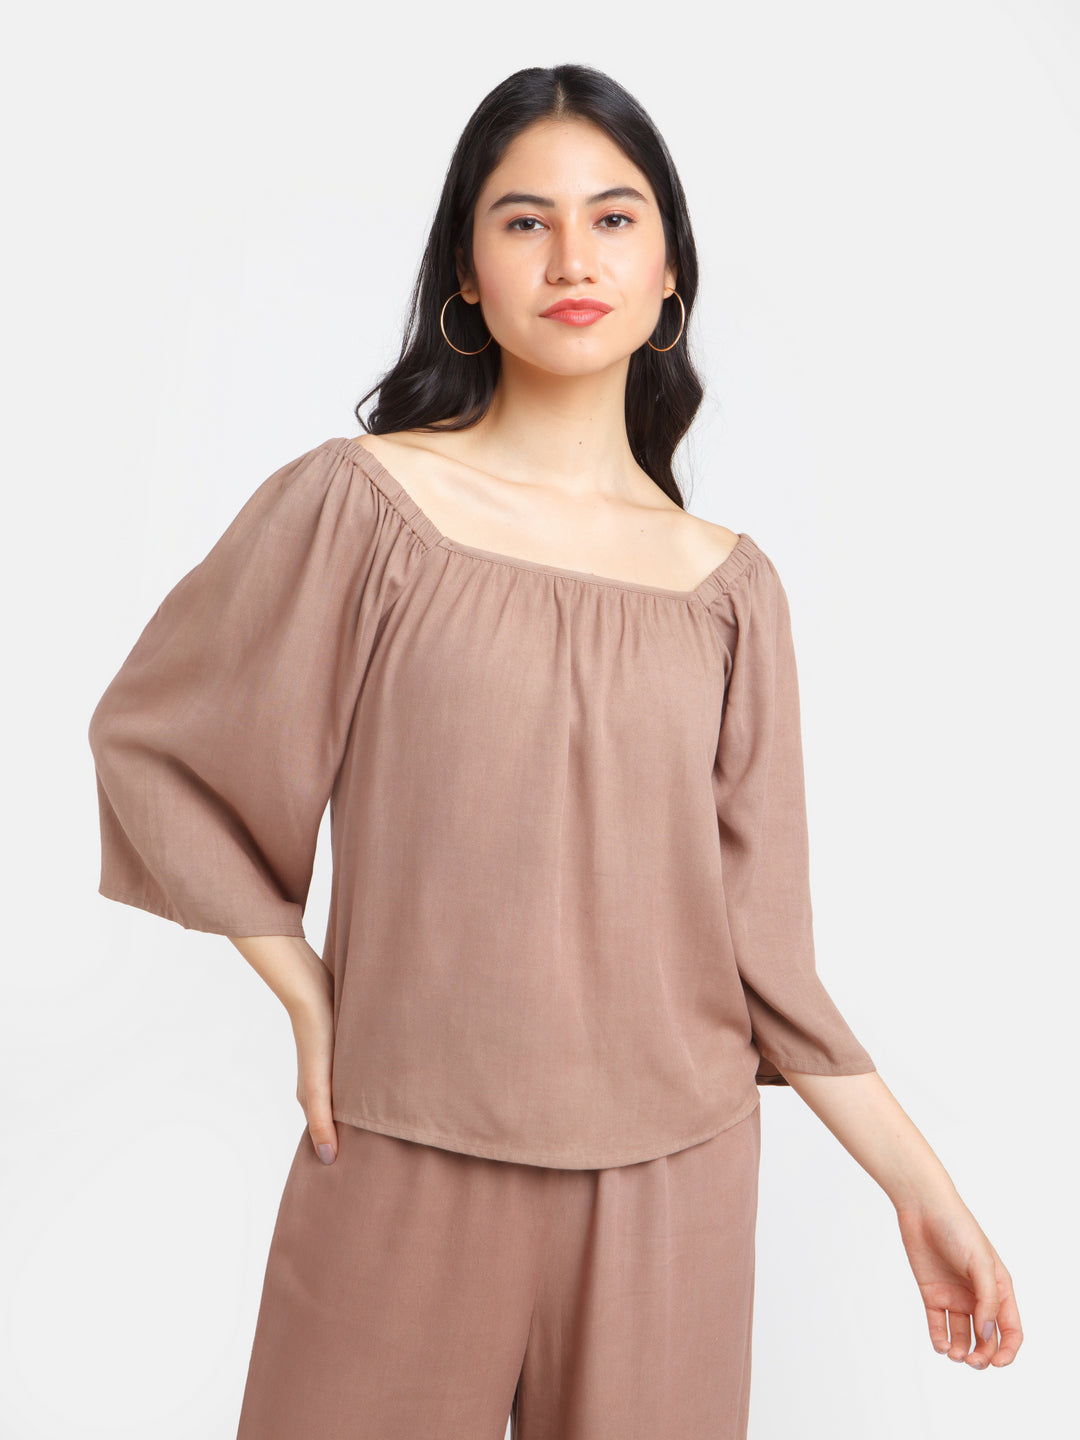 Brown Solid Elasticated Top For Women